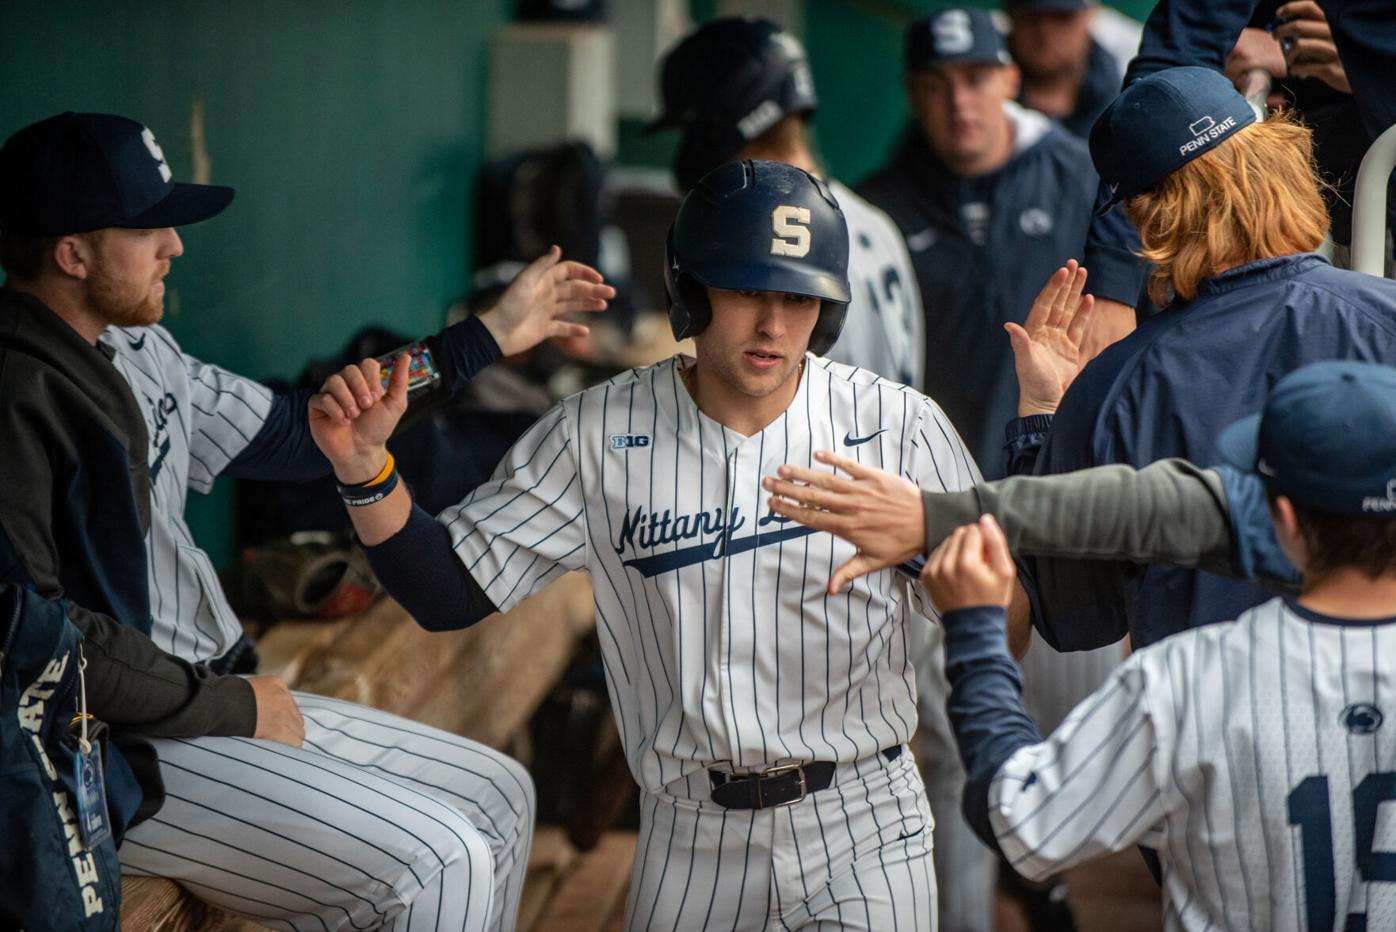 Wood Selected By Brewers In Fourth Round of MLB Draft - Penn State Athletics